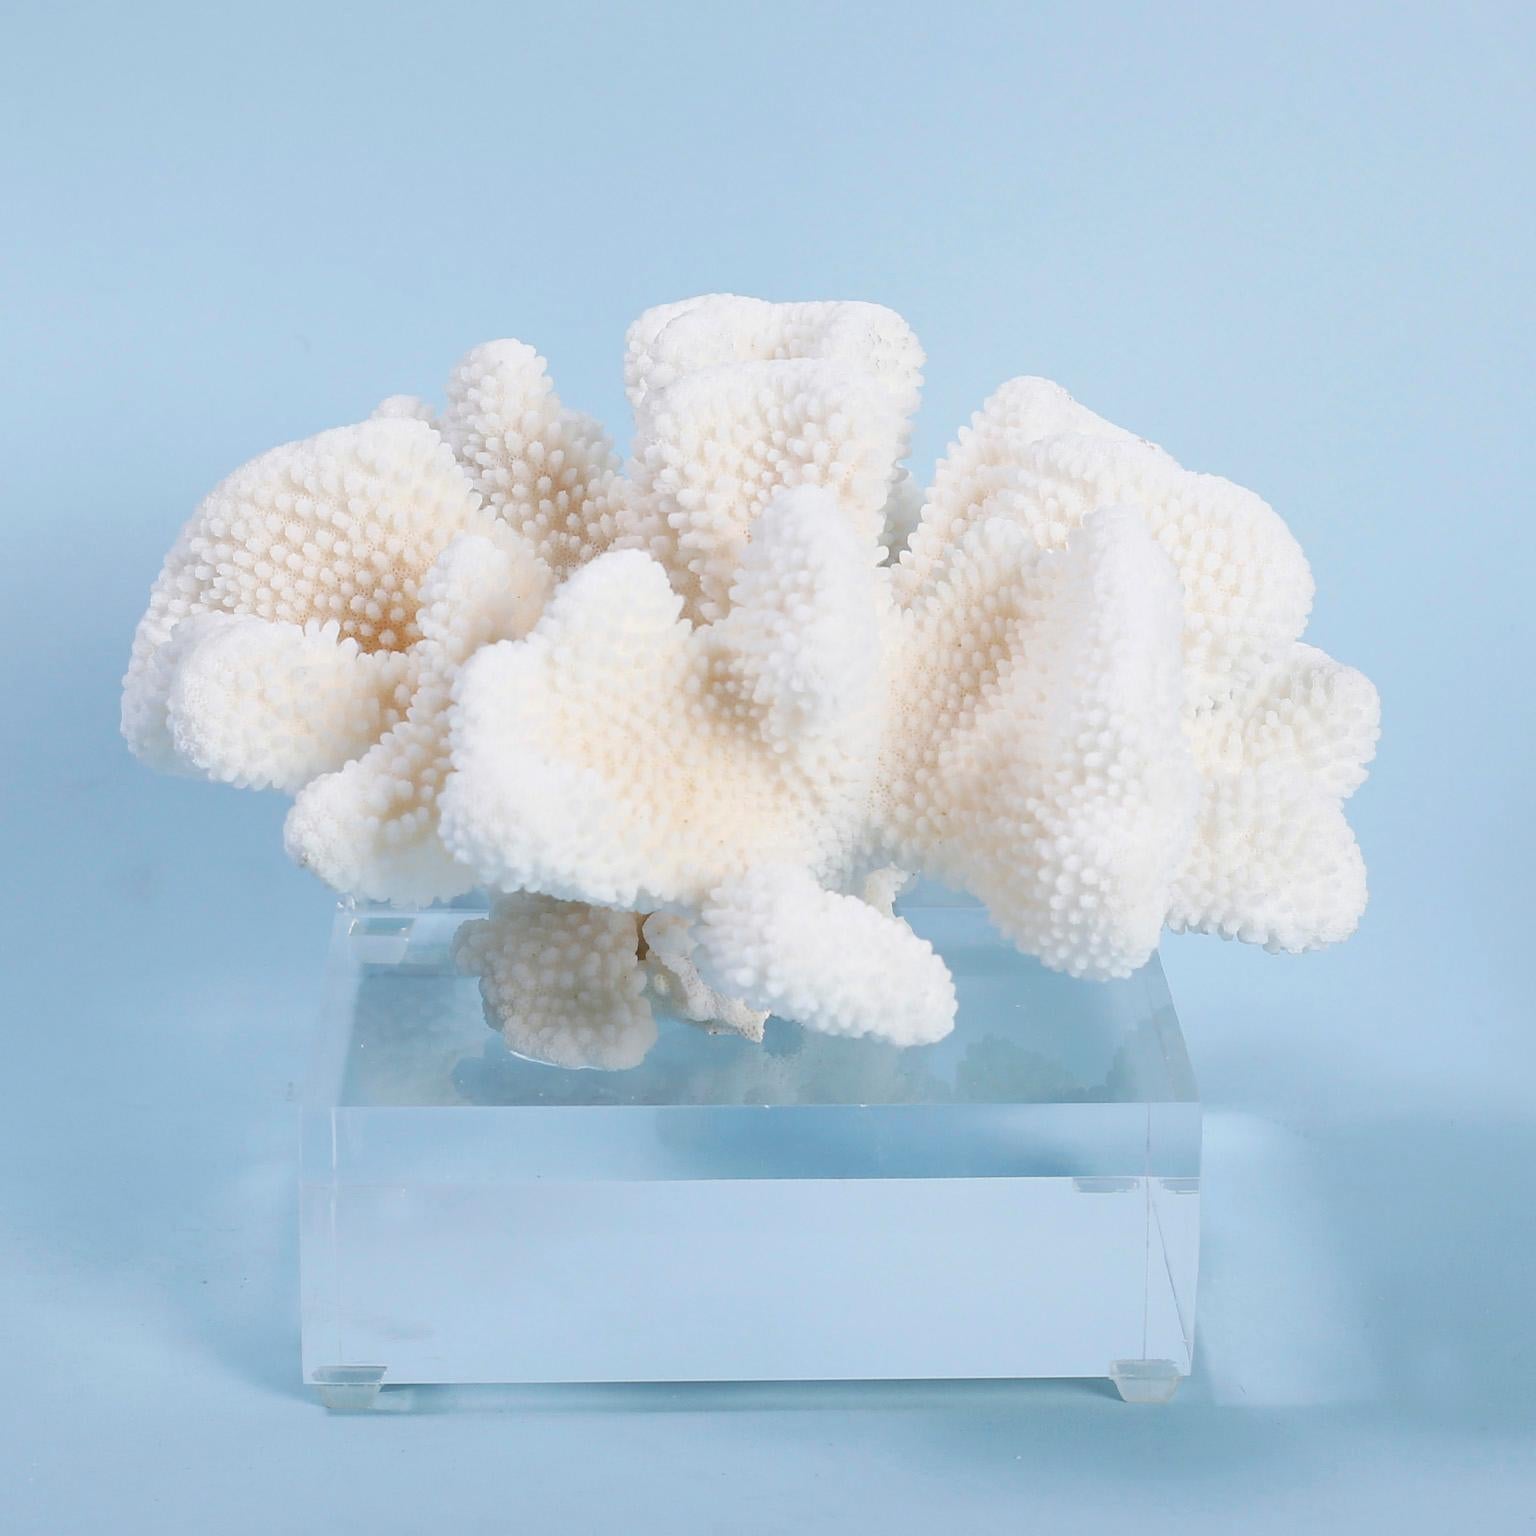 Cauliflower coral specimens with their distinctive sea inspired form, organic texture, and bleached white color. Presented on thick Lucite stands to enhance the sculptural elements. Priced individually. 

Available only in the United States of